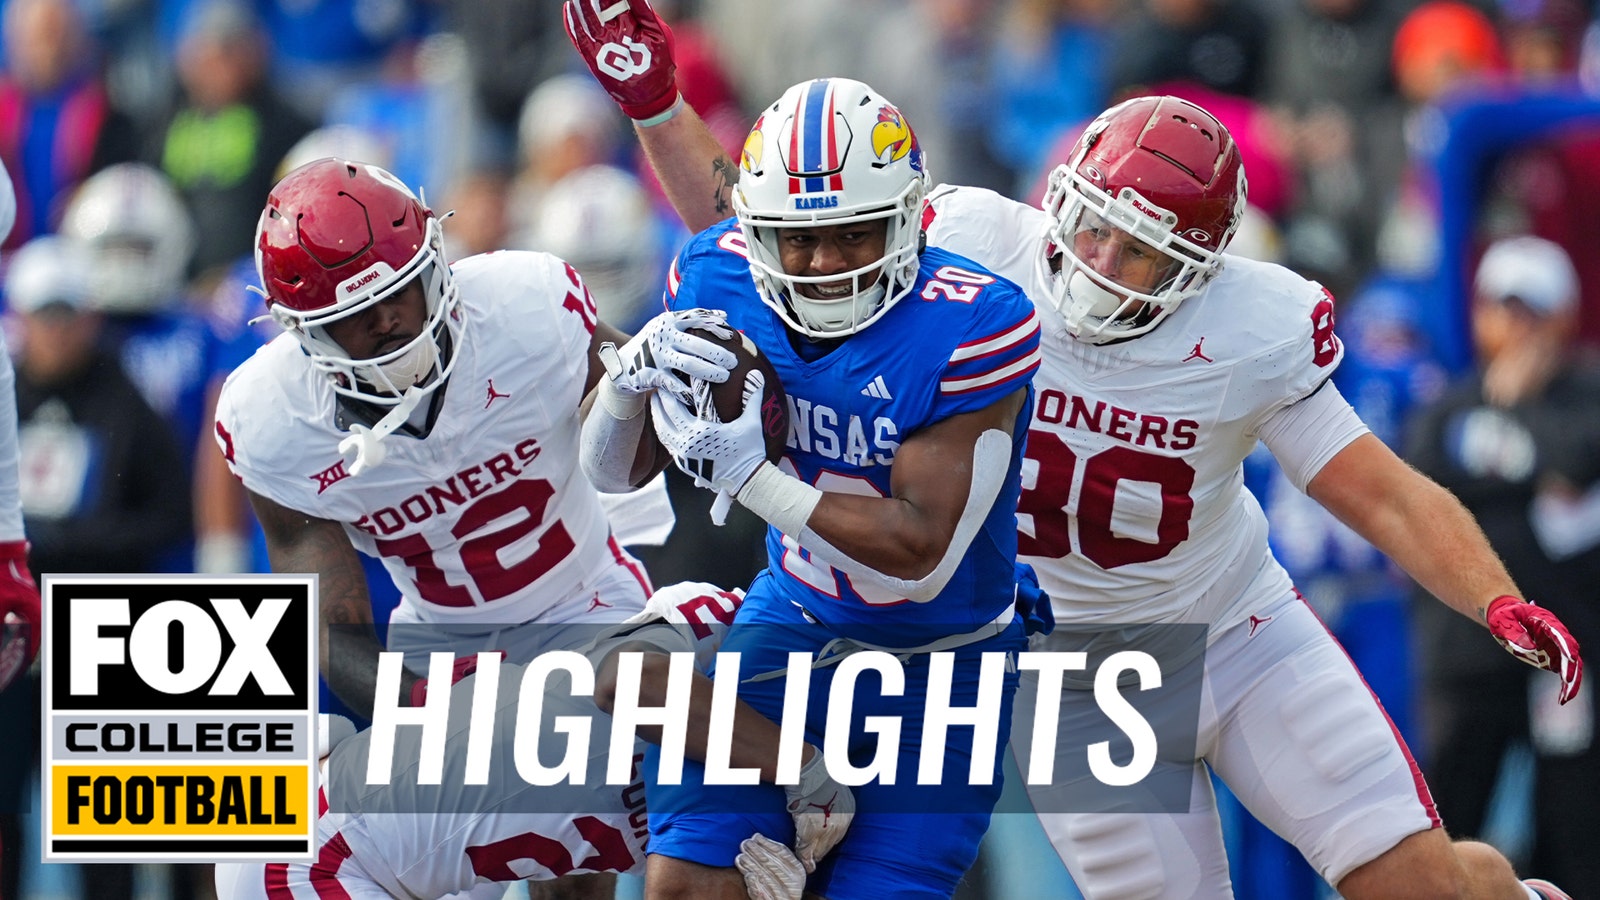 Highlights: Check out the amazing plays from Kansas-Oklahoma